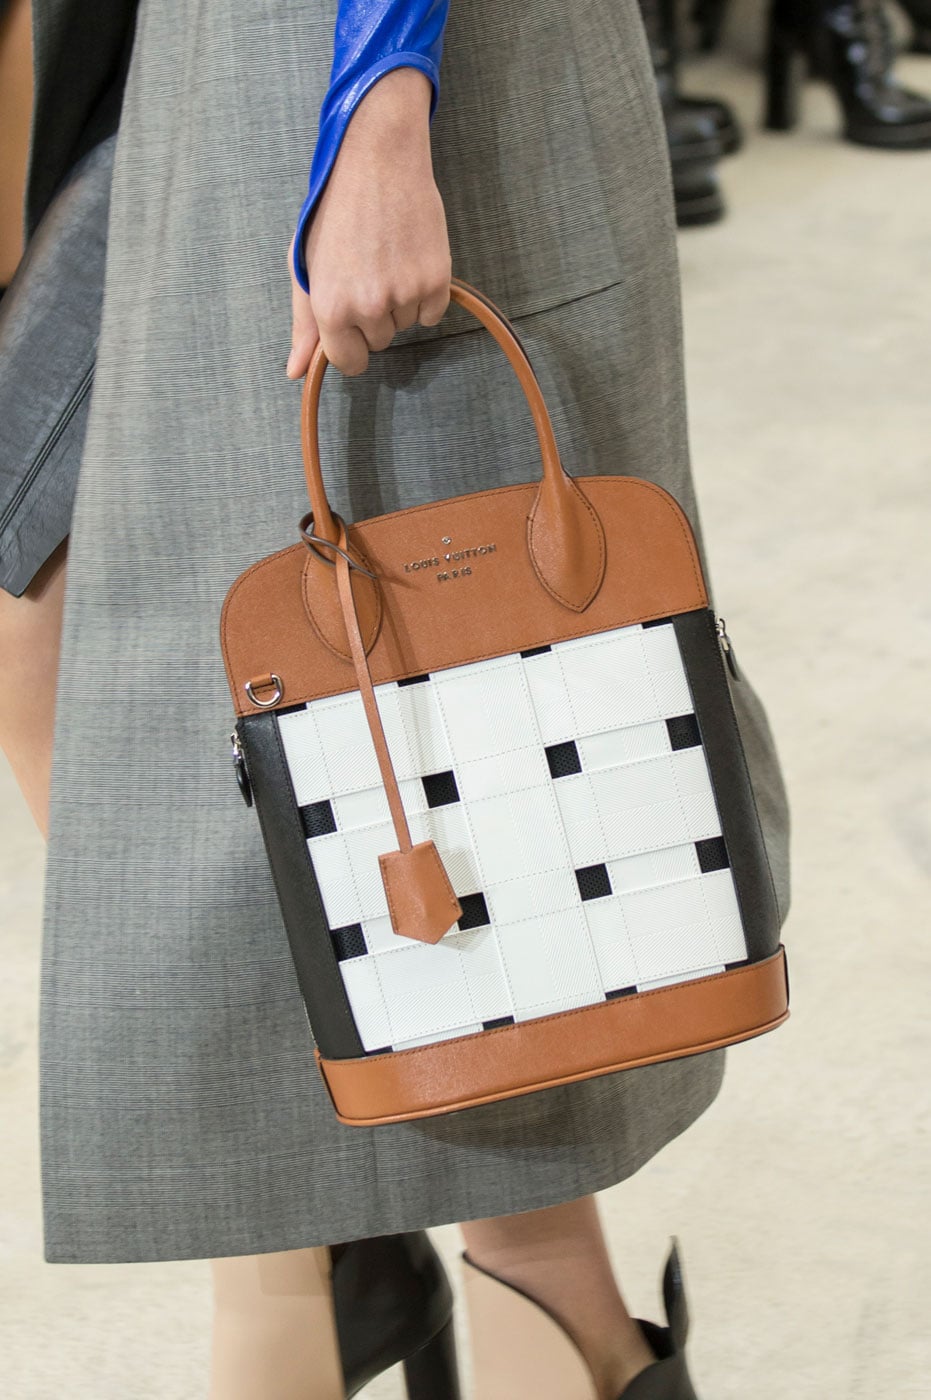 Get a Peek at Louis Vuitton's Upcoming Spring 2017 Bags in the